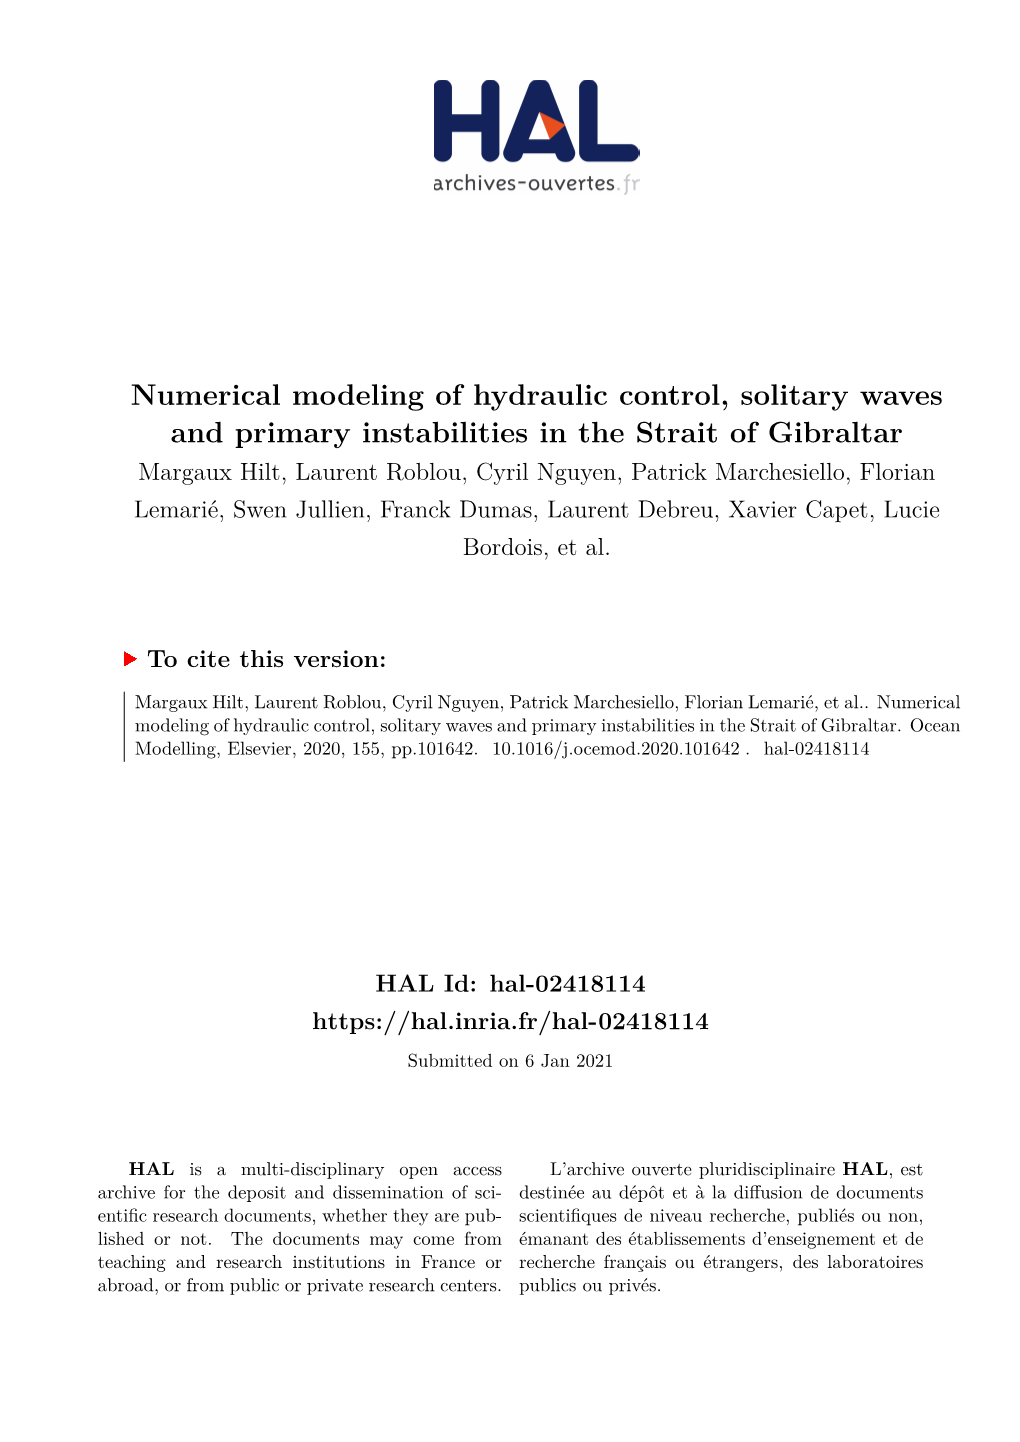 Numerical Modeling of Hydraulic Control, Solitary Waves and Primary